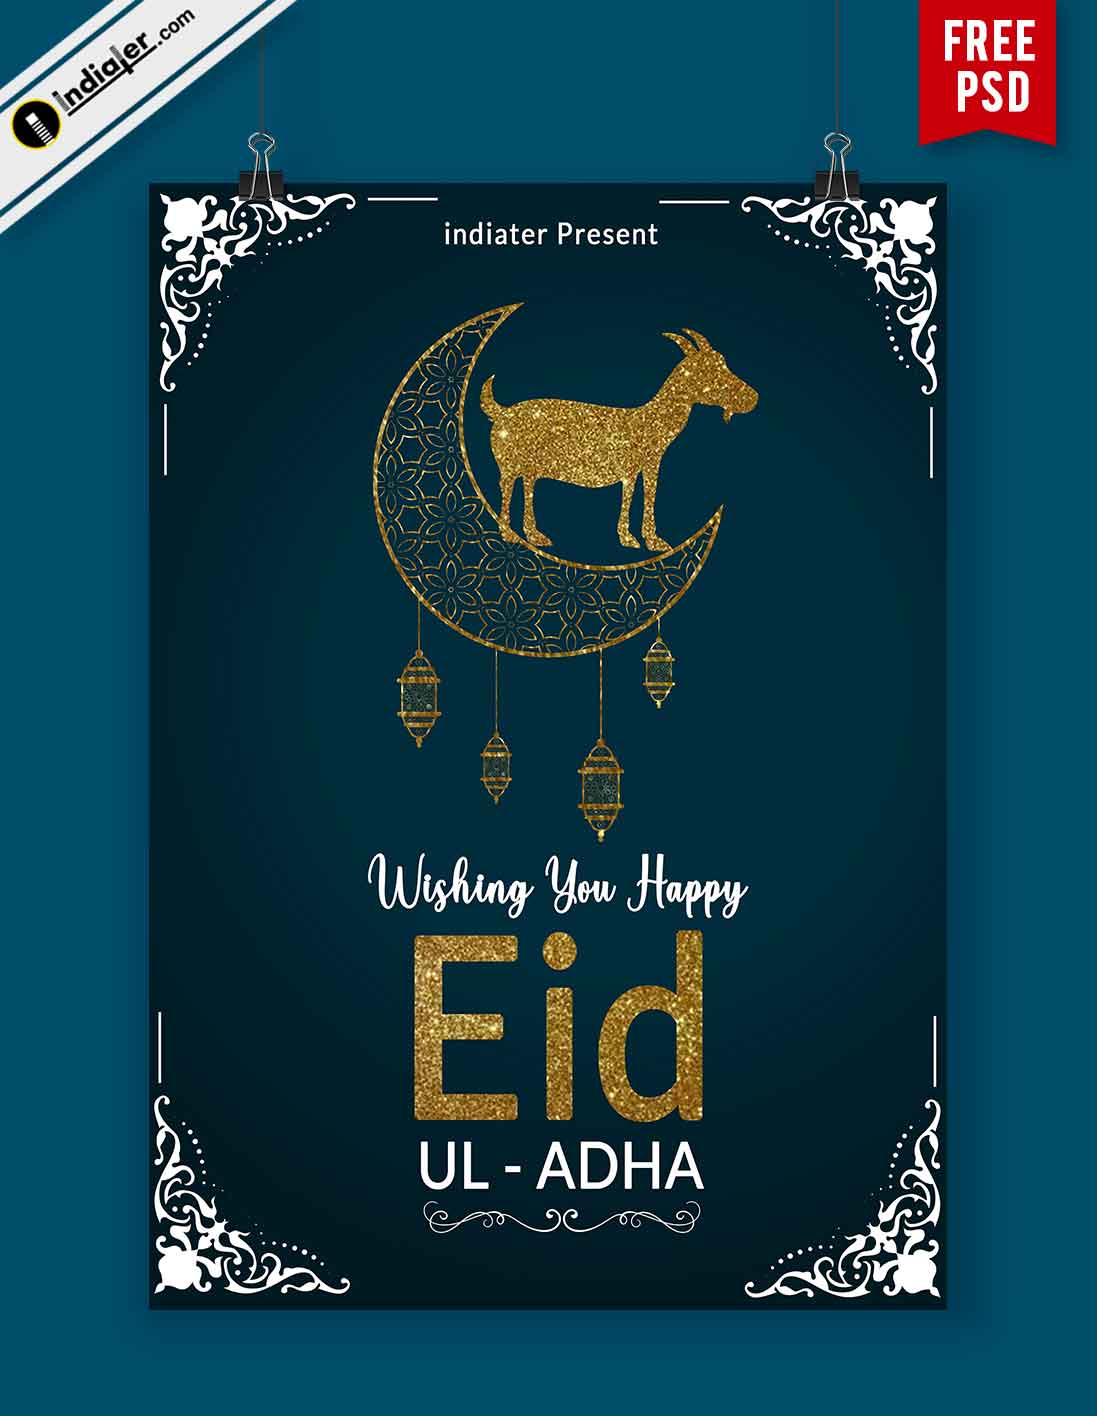 free-eid-ul-adha-wishes-flyer-psd-template-indiater